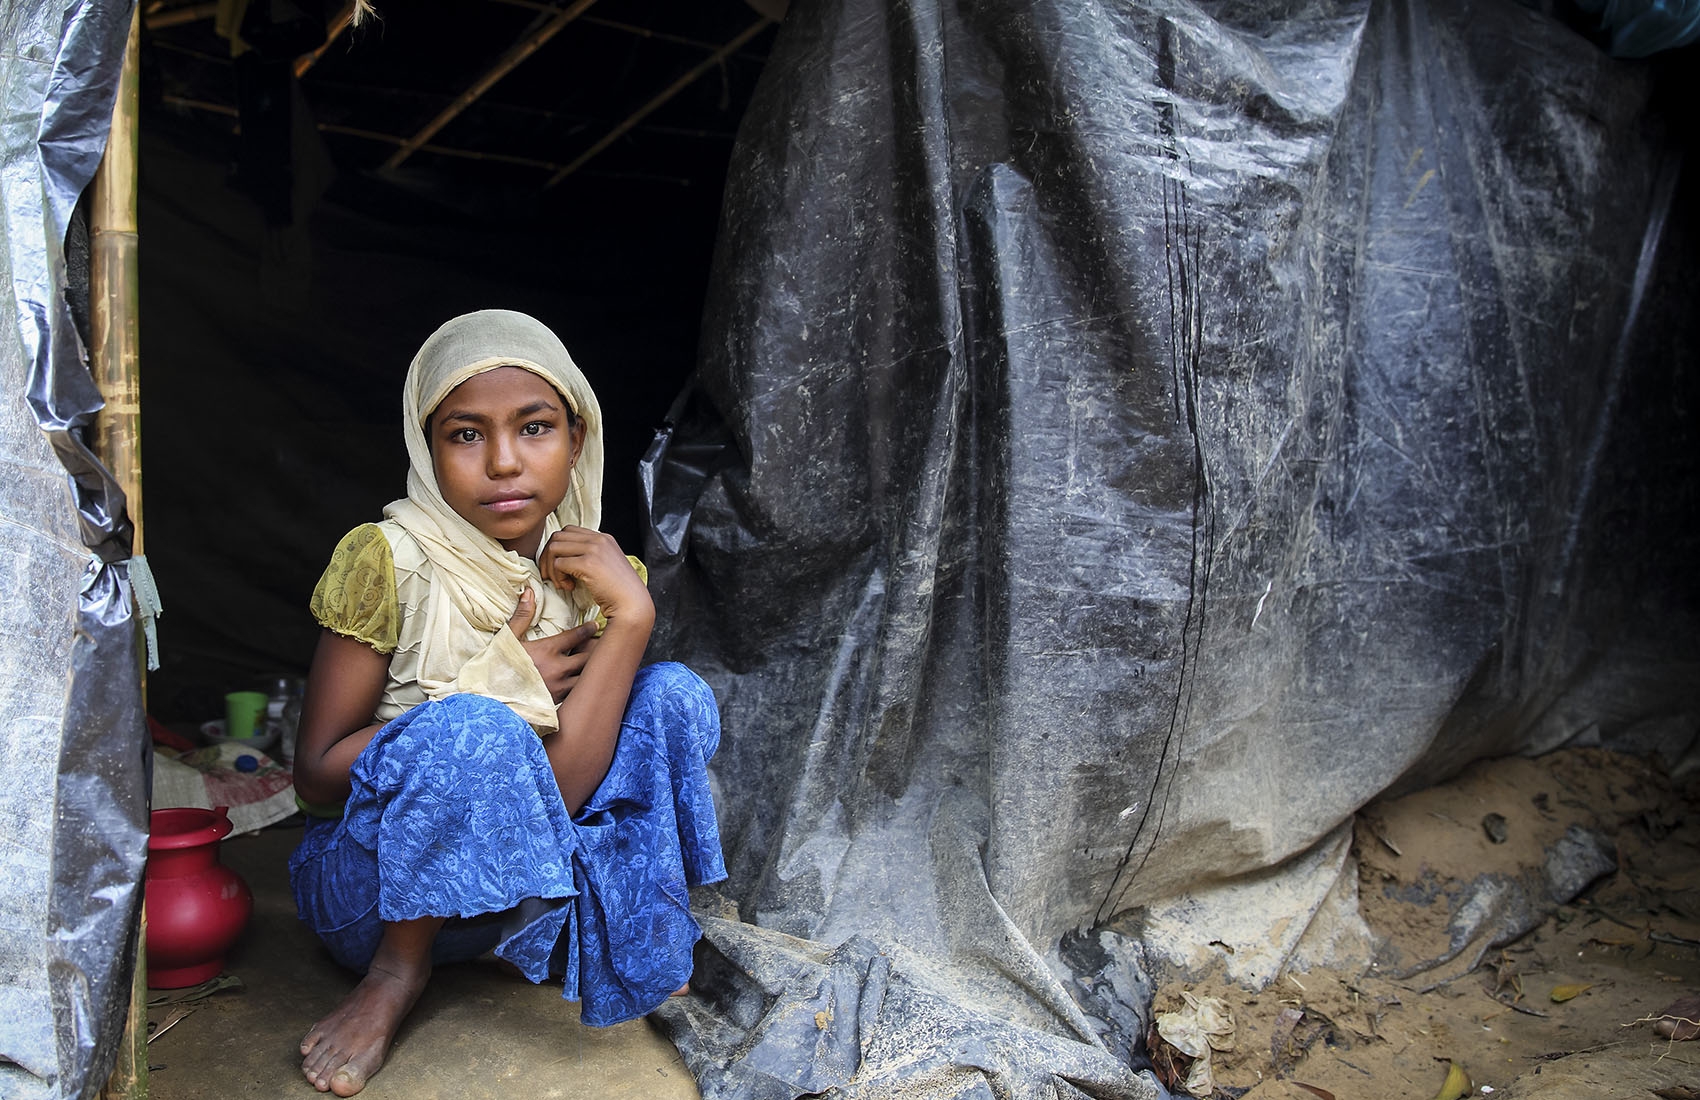 Rohingya, a little girl in a yellow top and blue skirt sits in her tent